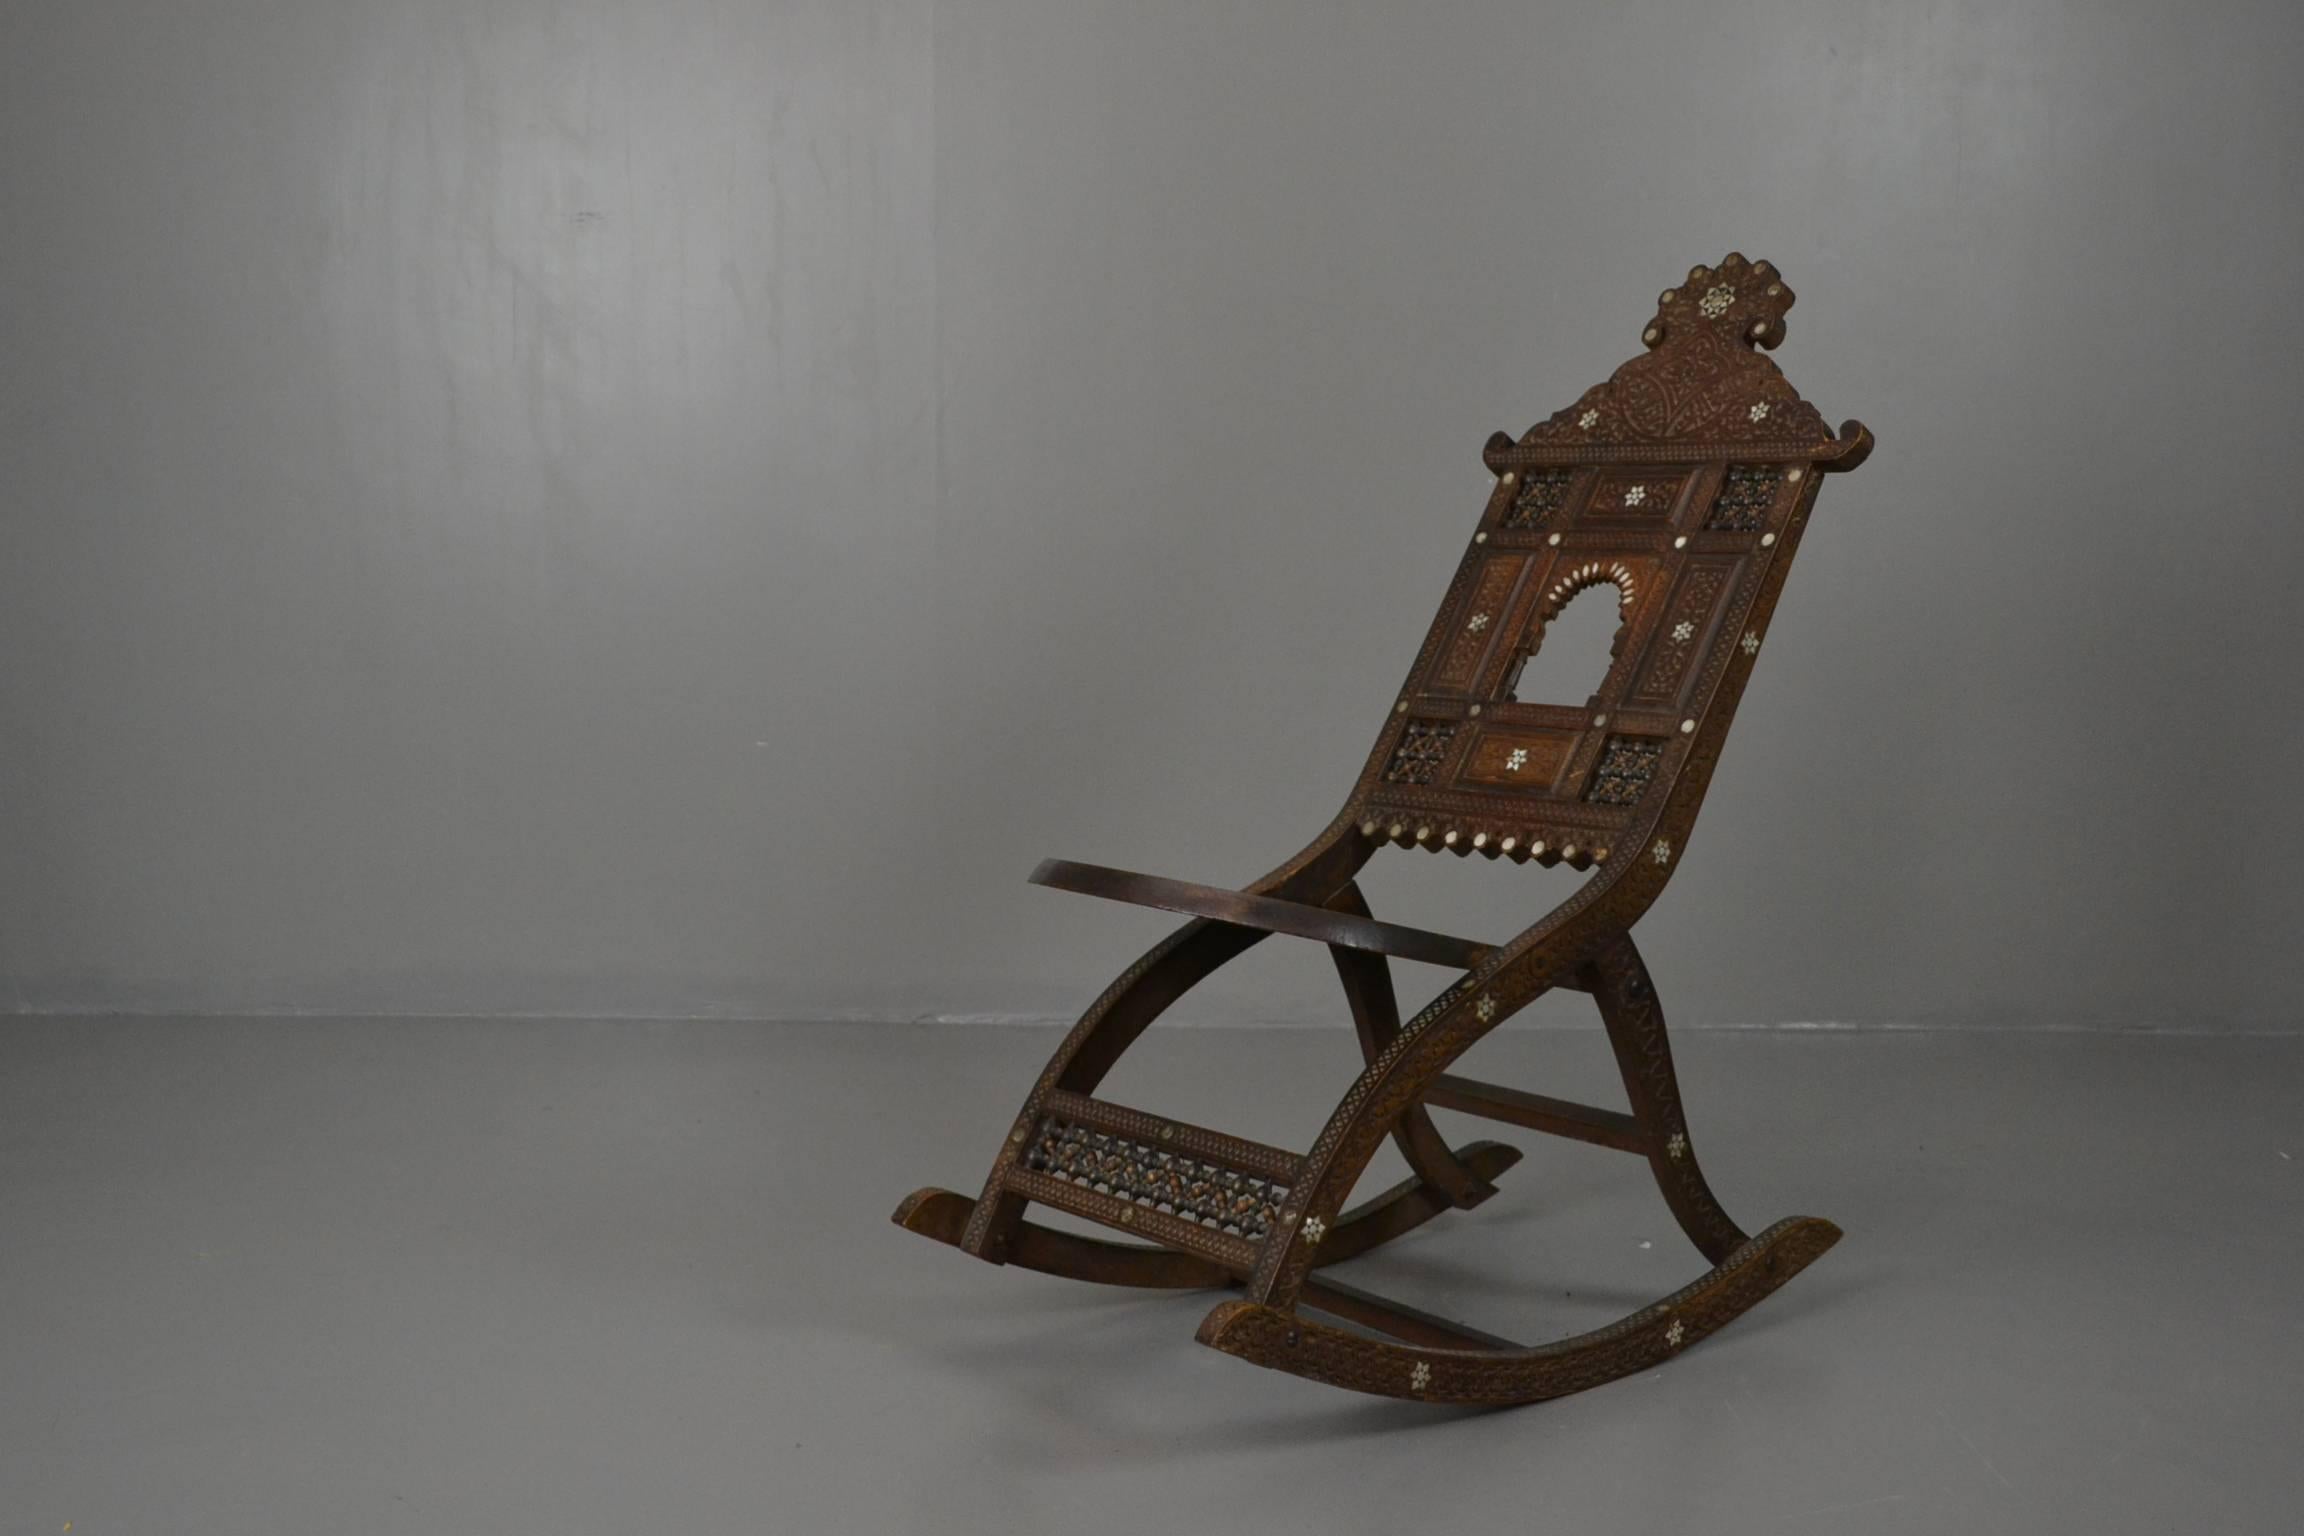 20th century Moorish style rocking chair. Beautifully made with solid hardwood construction with carved and inlaid decoration.

Please click our logo for more items, and to see our full inventory.